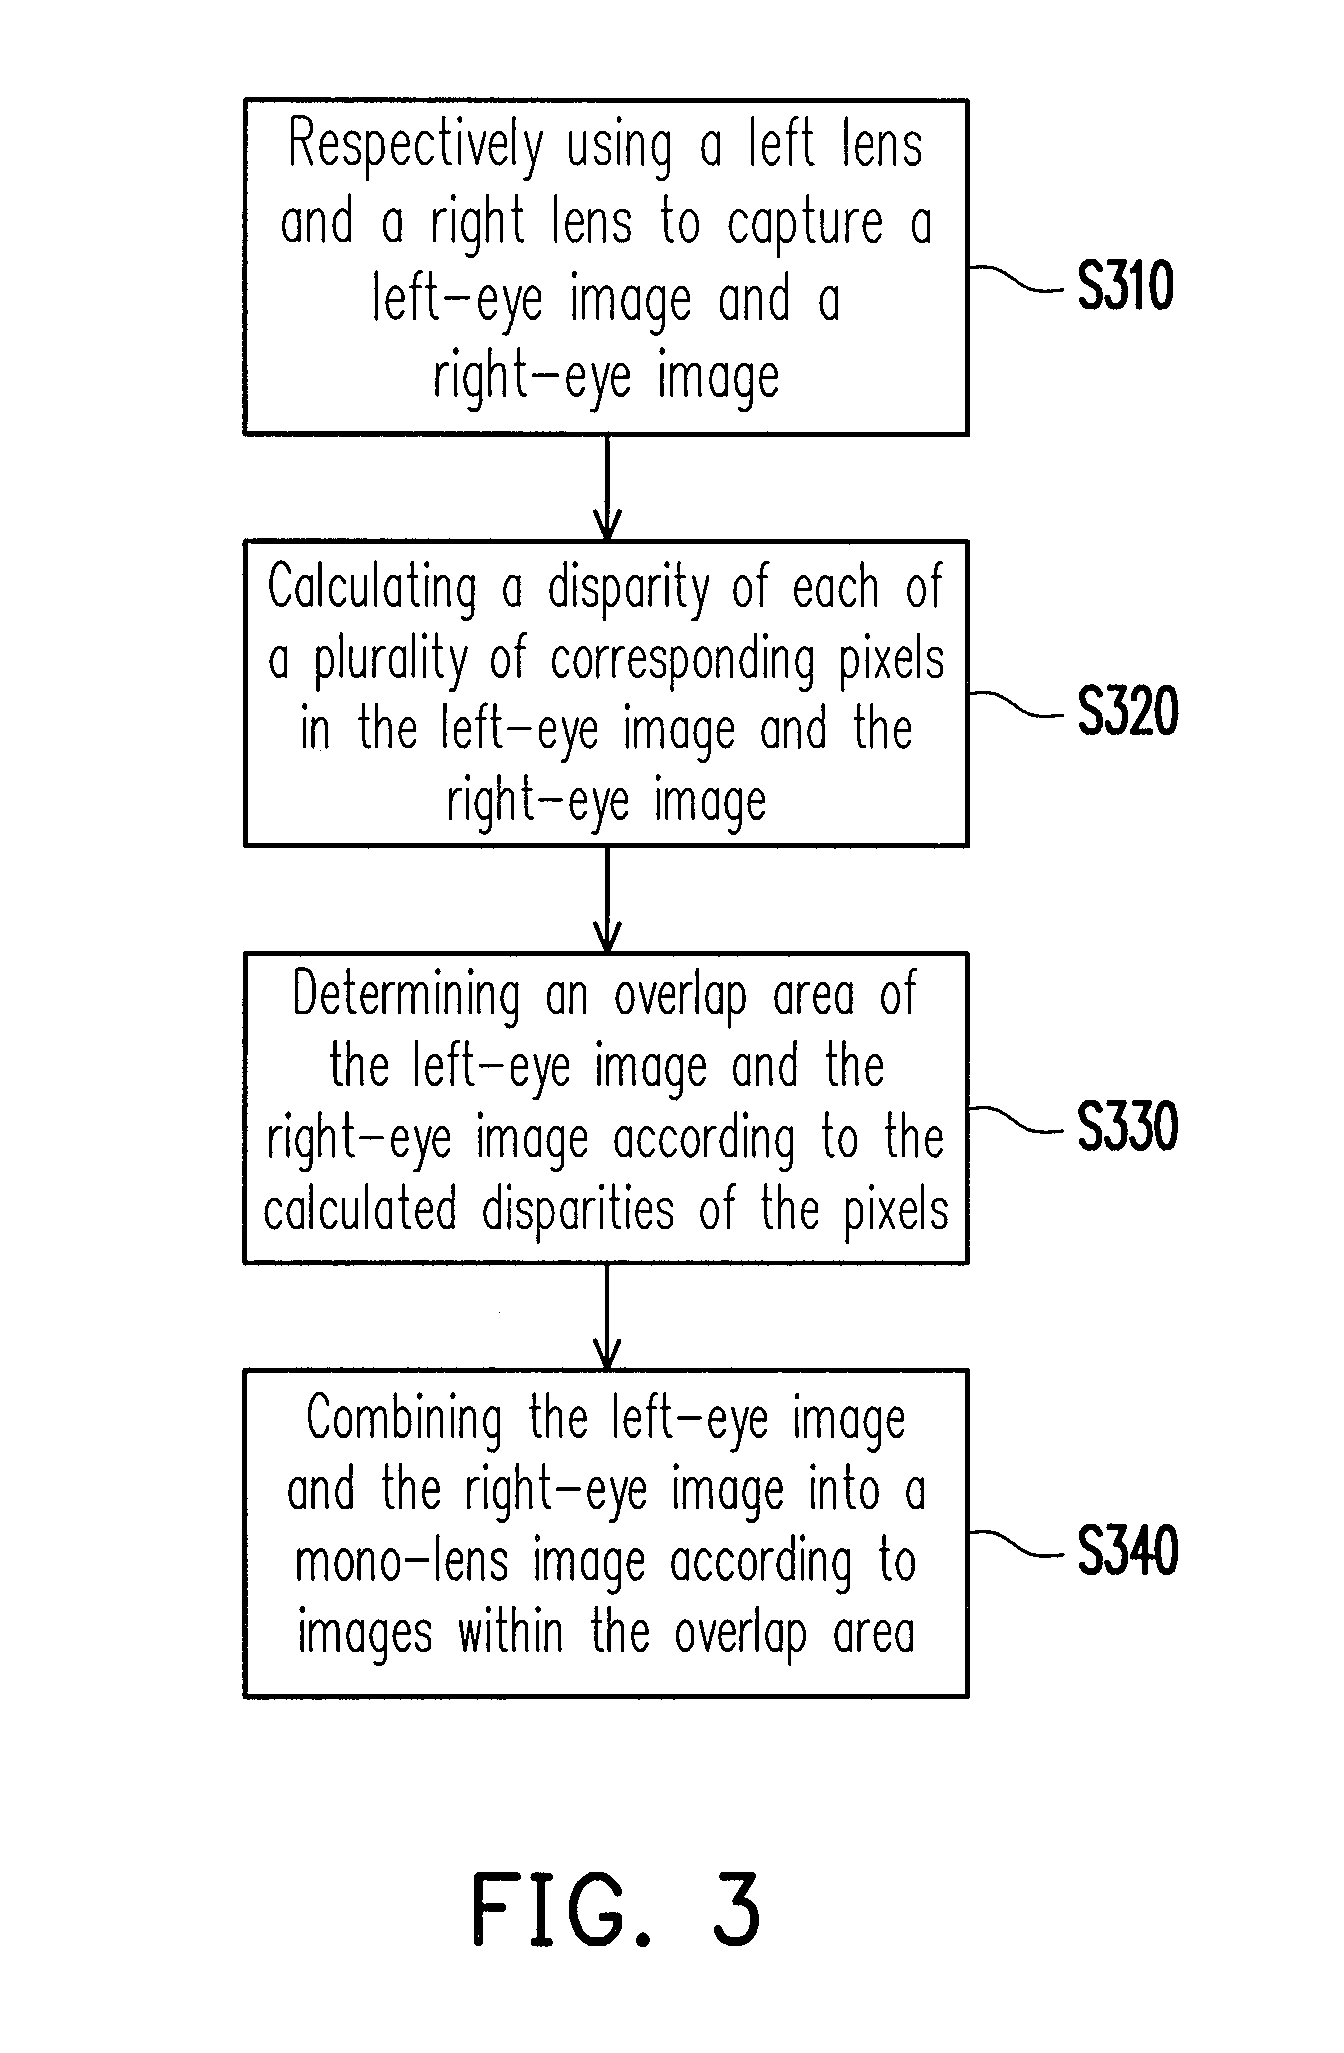 Method for combining dual-lens images into mono-lens image